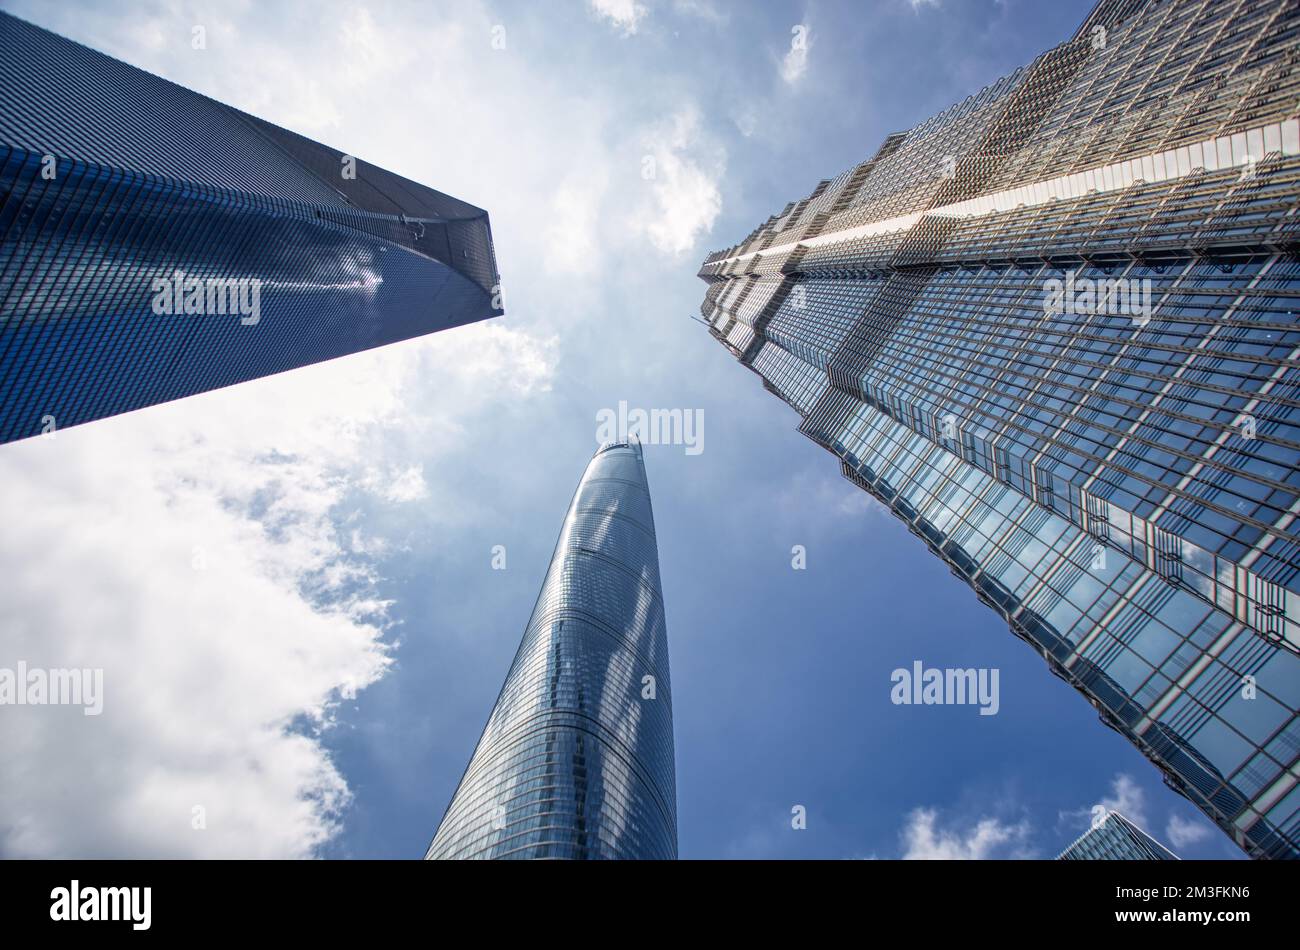 Shanghai World Financial Center,Shanghai tower and Jin Mao Tower photographed from below with a wide lens in summer against a blue sky and clouds Stock Photo